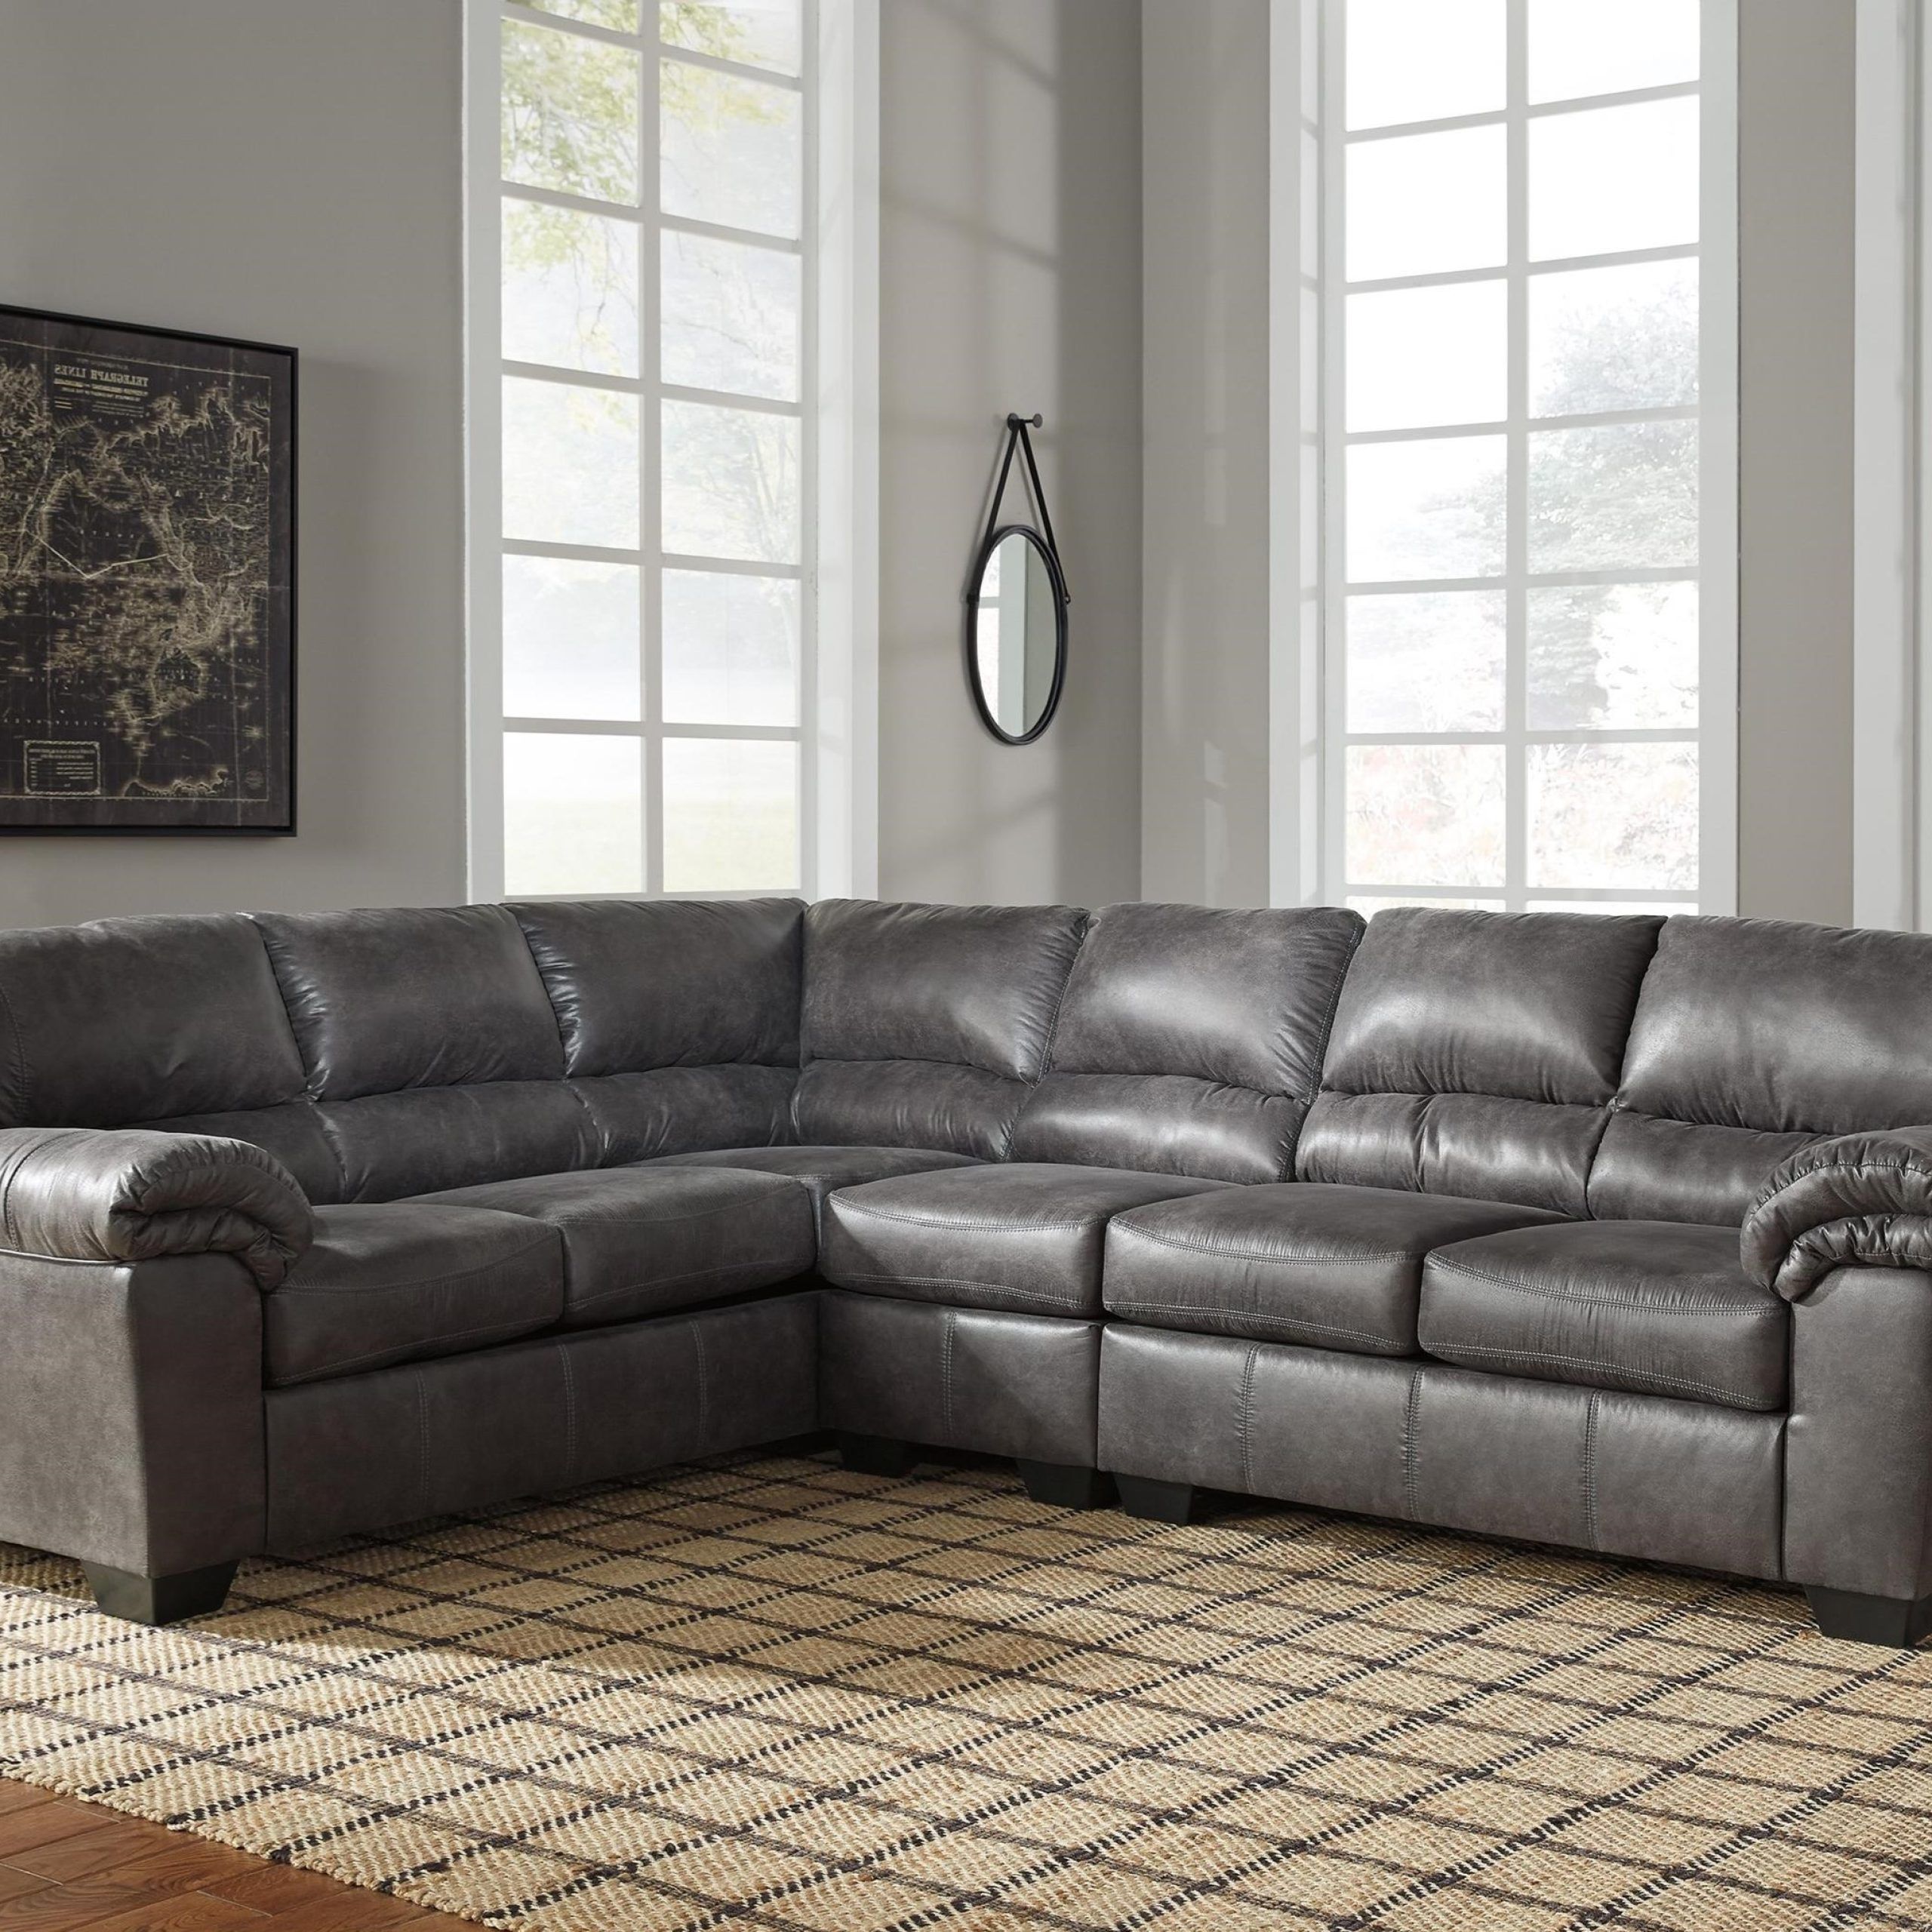 Signature Designashley Bladen 3 Piece Faux Leather Sectional Within Well Known 3 Piece Leather Sectional Sofa Sets (View 5 of 15)